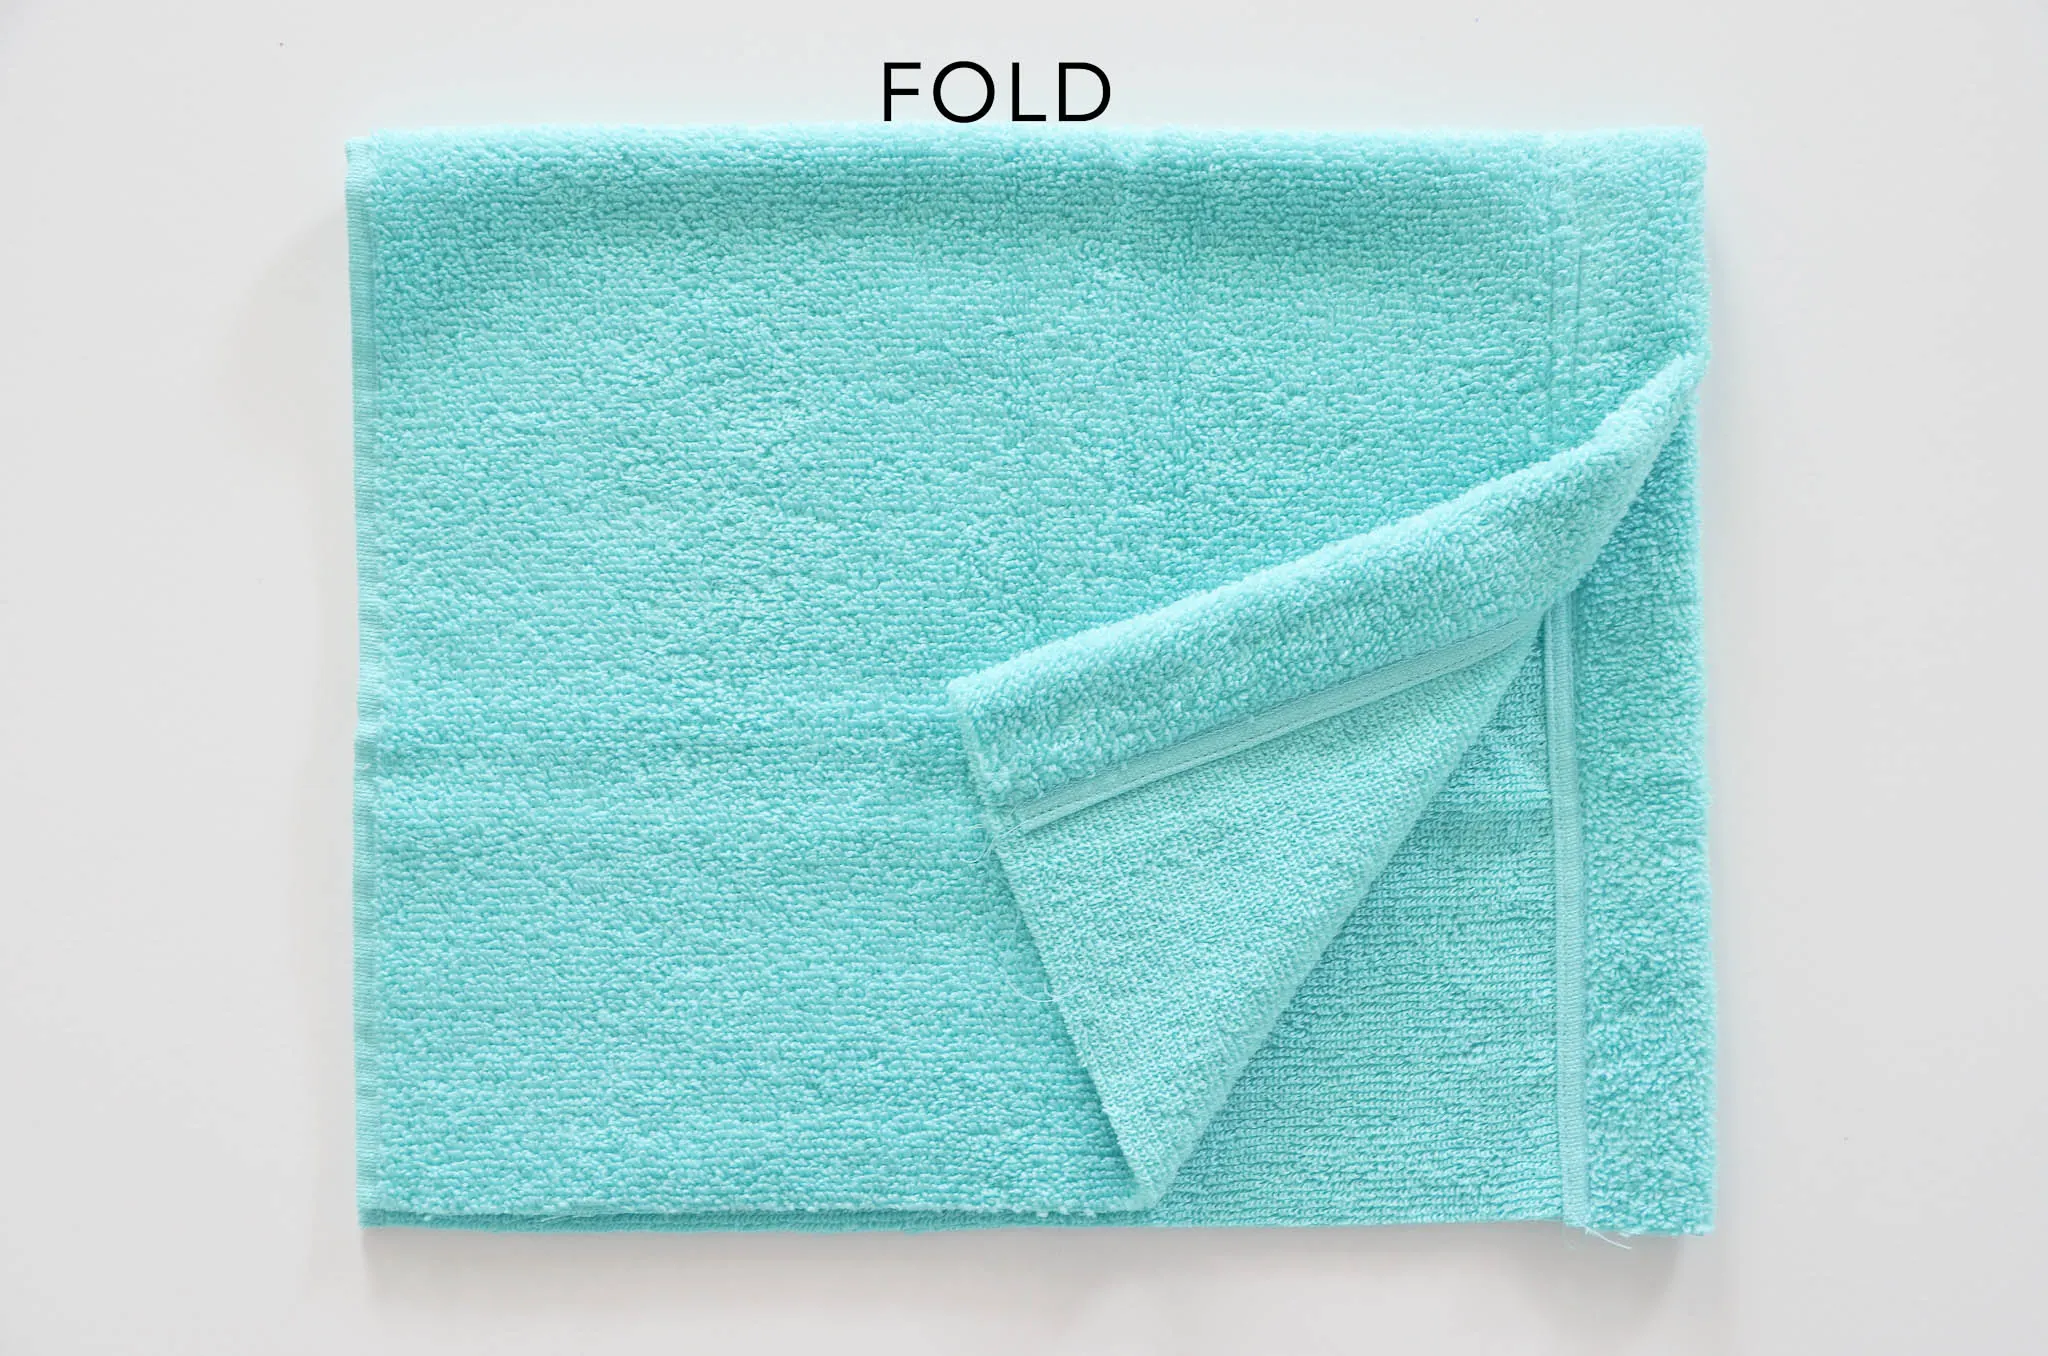 Tutorial: Hooded Towel Thingy - Popsicle Blog